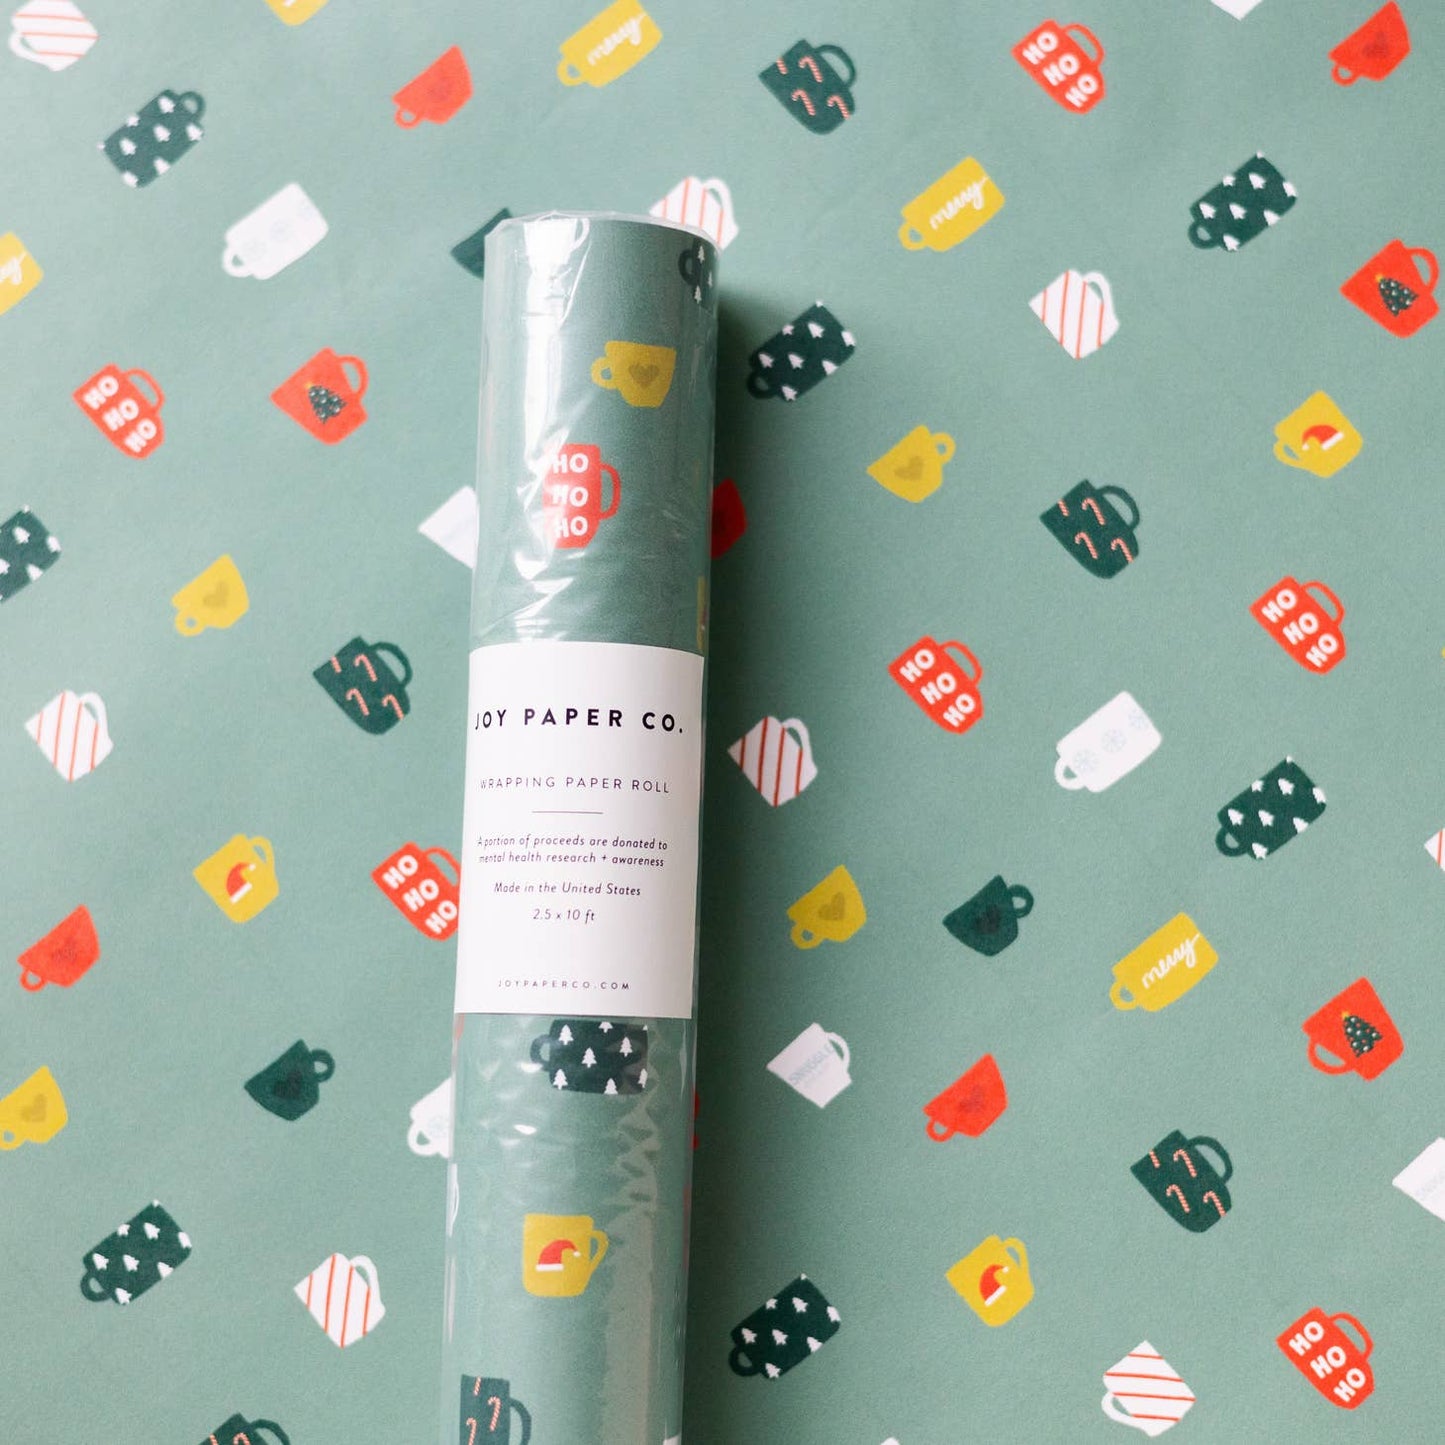 Holiday Coffee Mugs Wrapping Paper Roll - Storm and Sky Shoppe - Joy Paper Co.